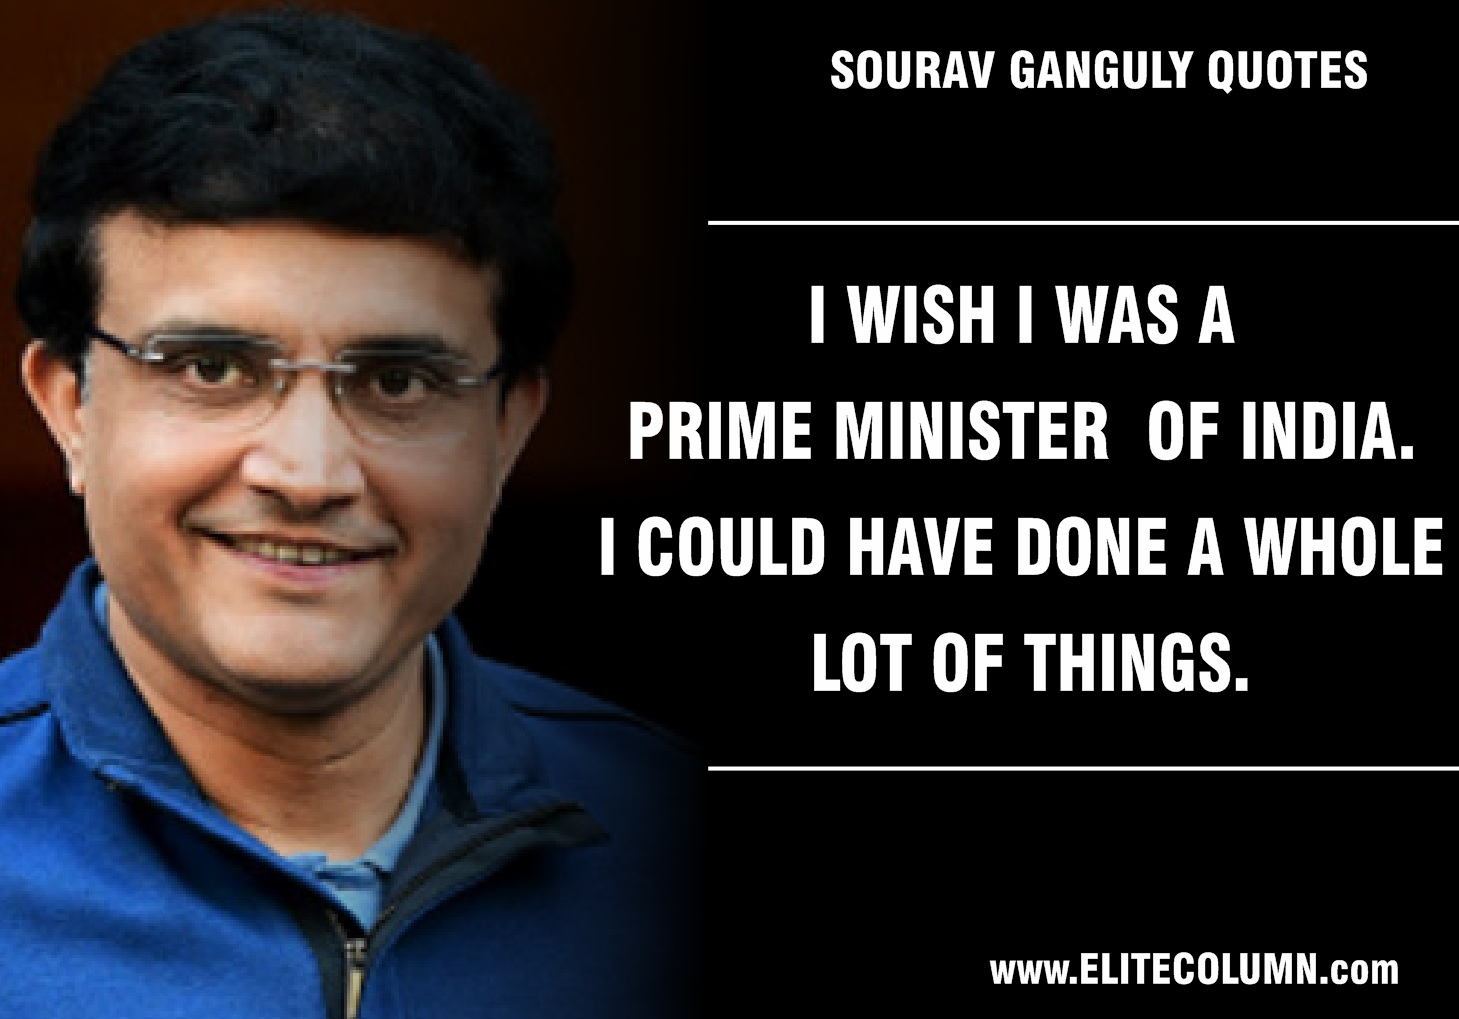 Sourav Ganguly Quotes (3)